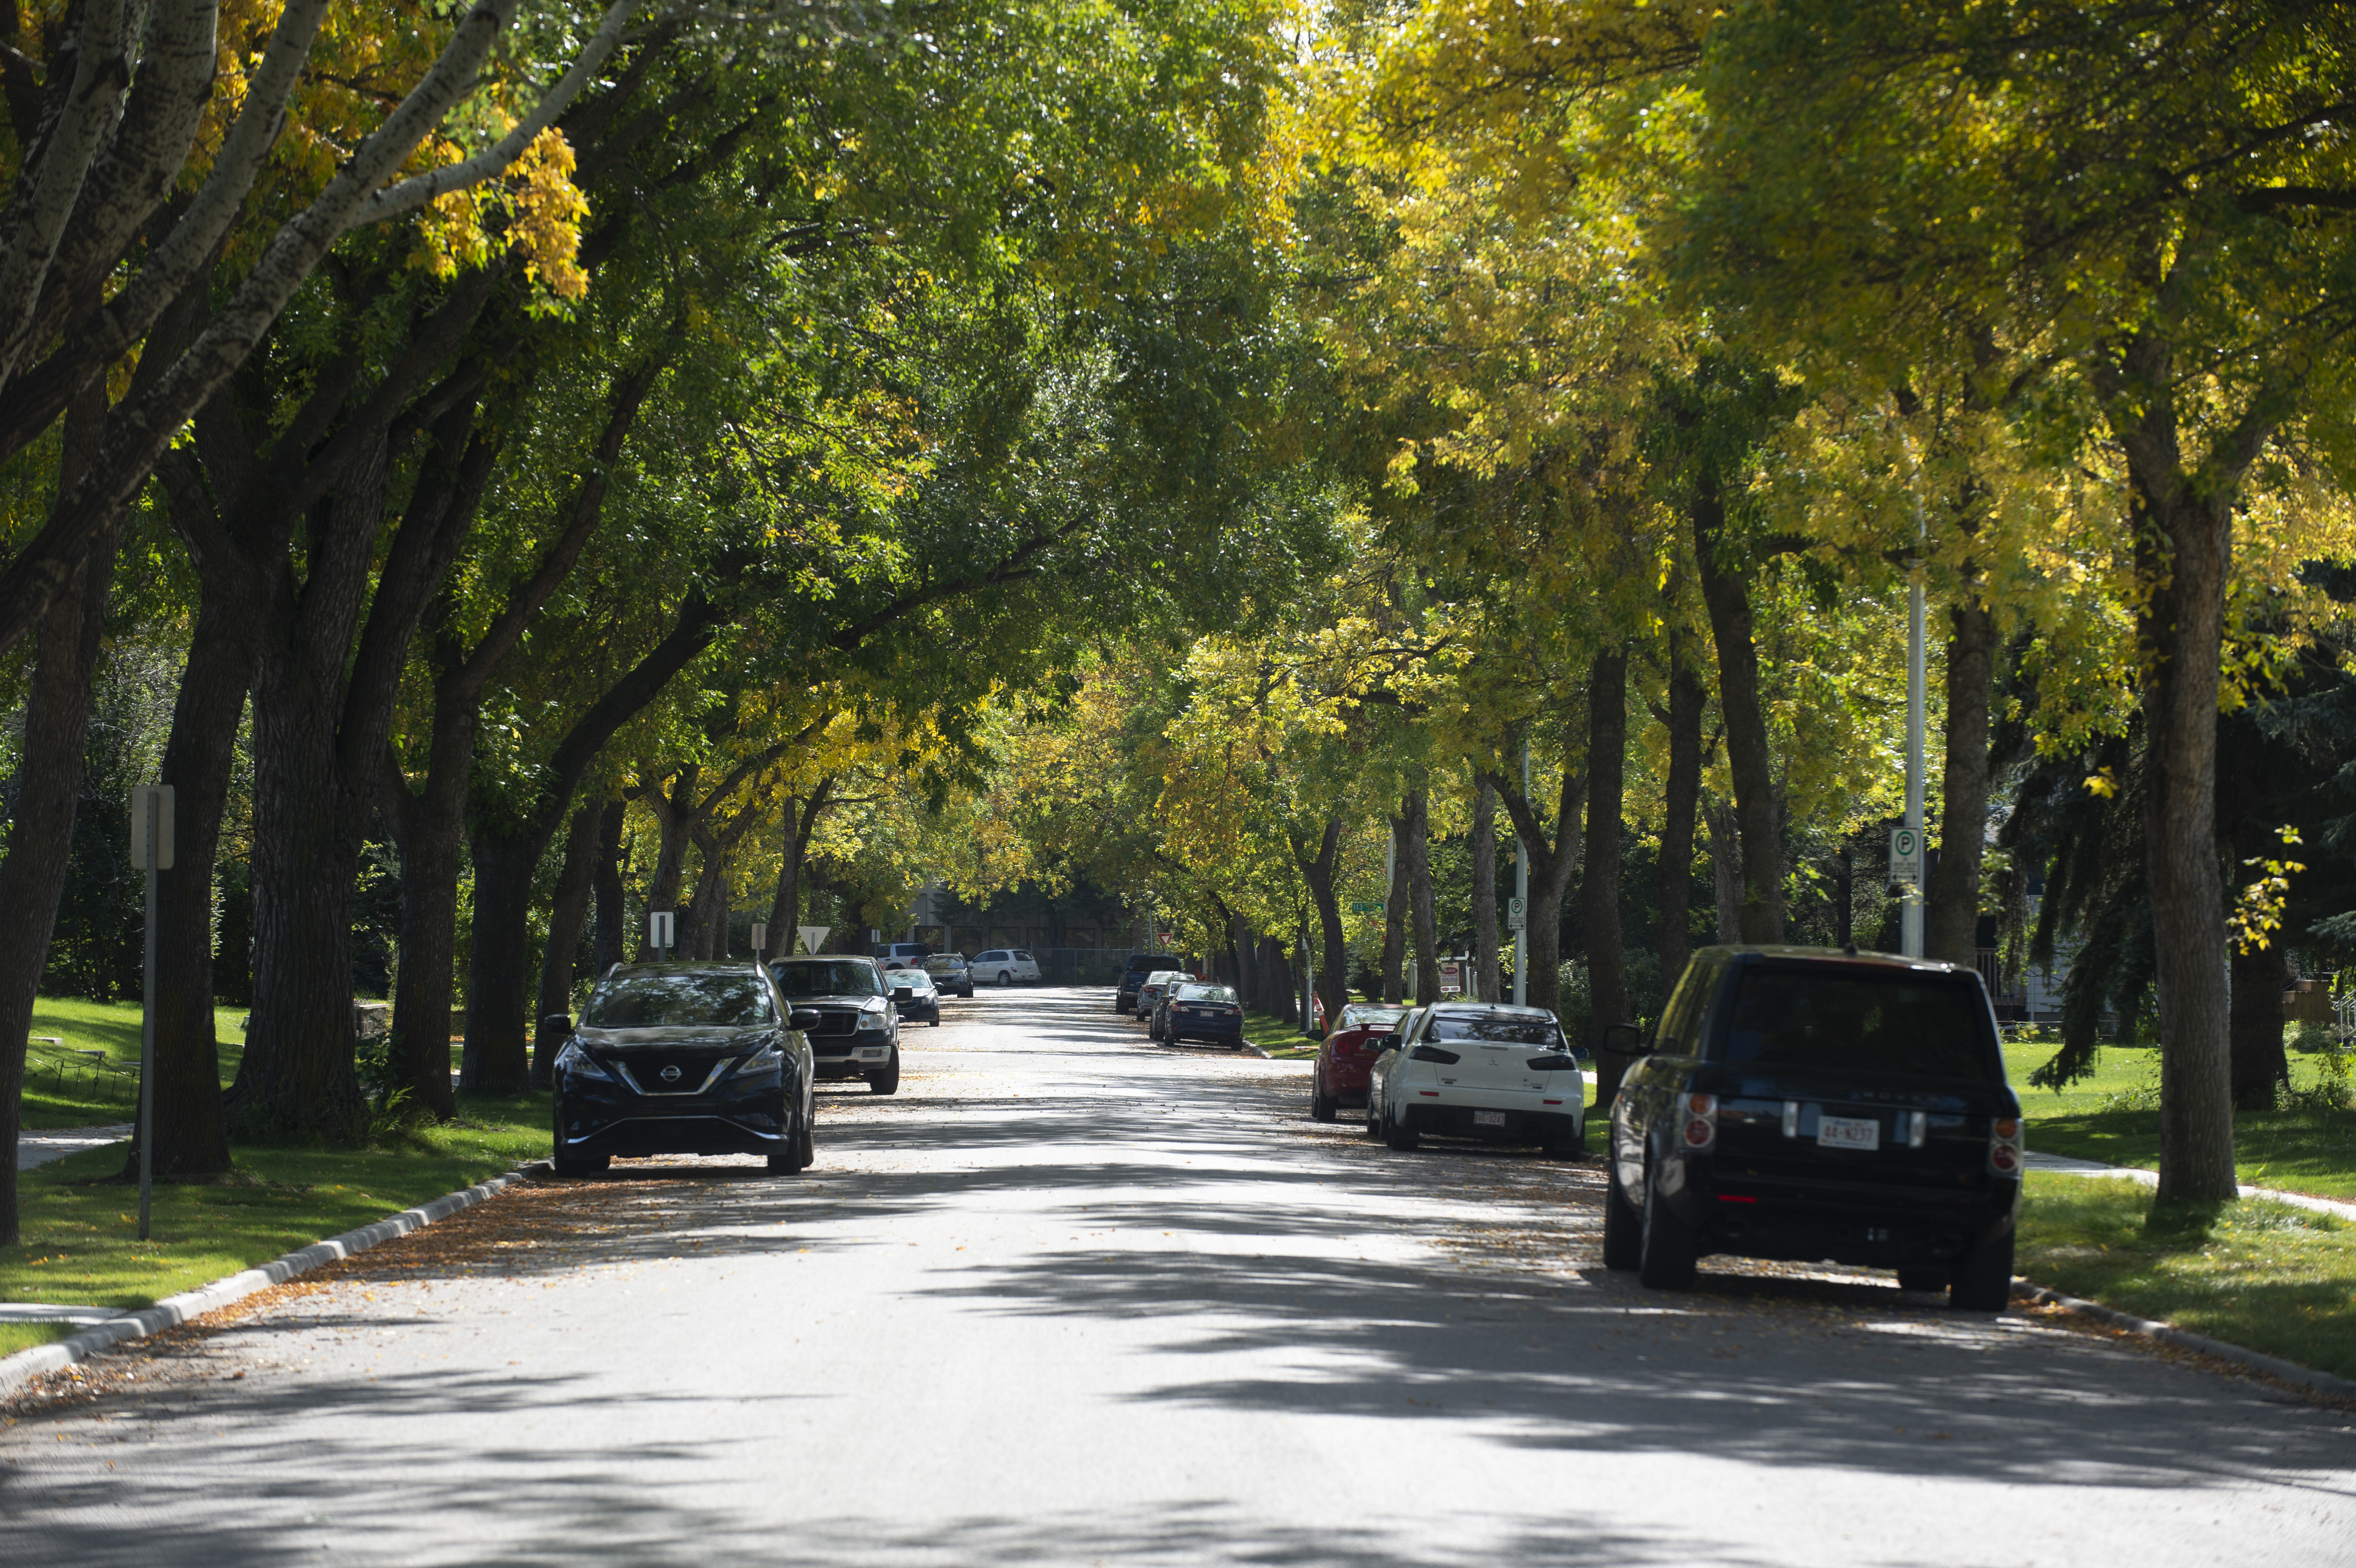 A residential street, lined with mature trees in early fall.